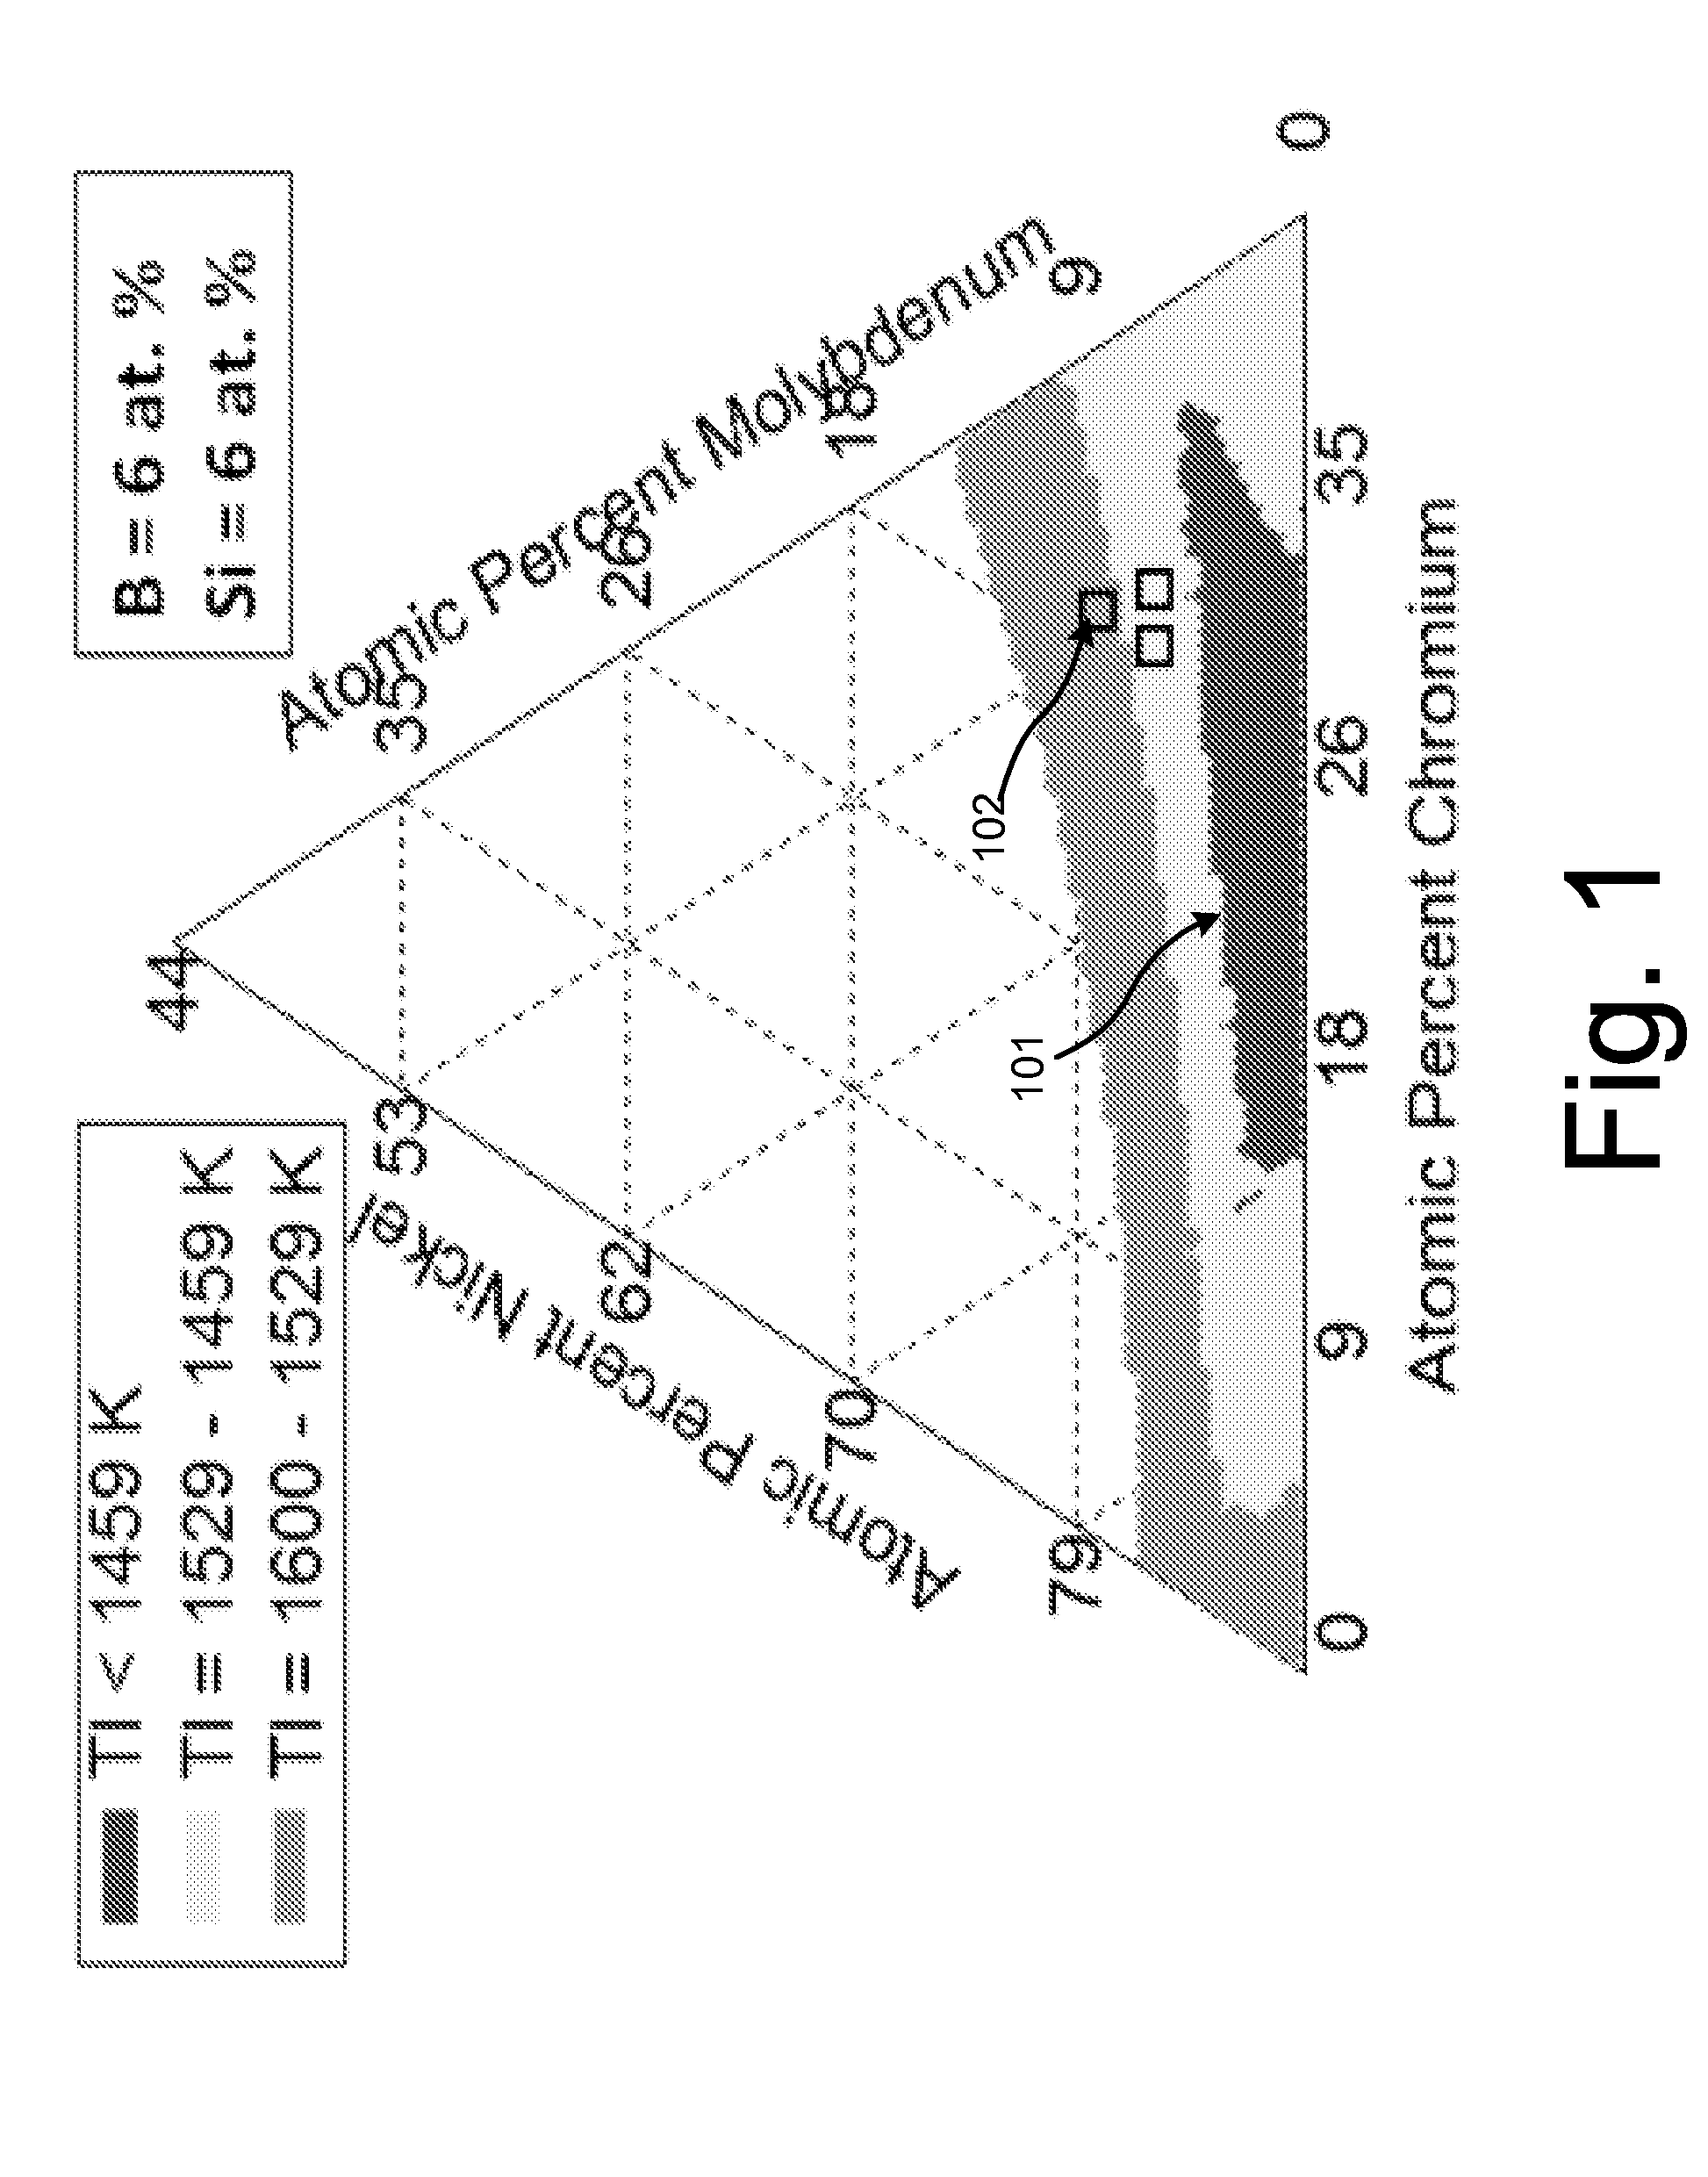 Fine grained Ni-based alloys for resistance to stress corrosion cracking and methods for their design